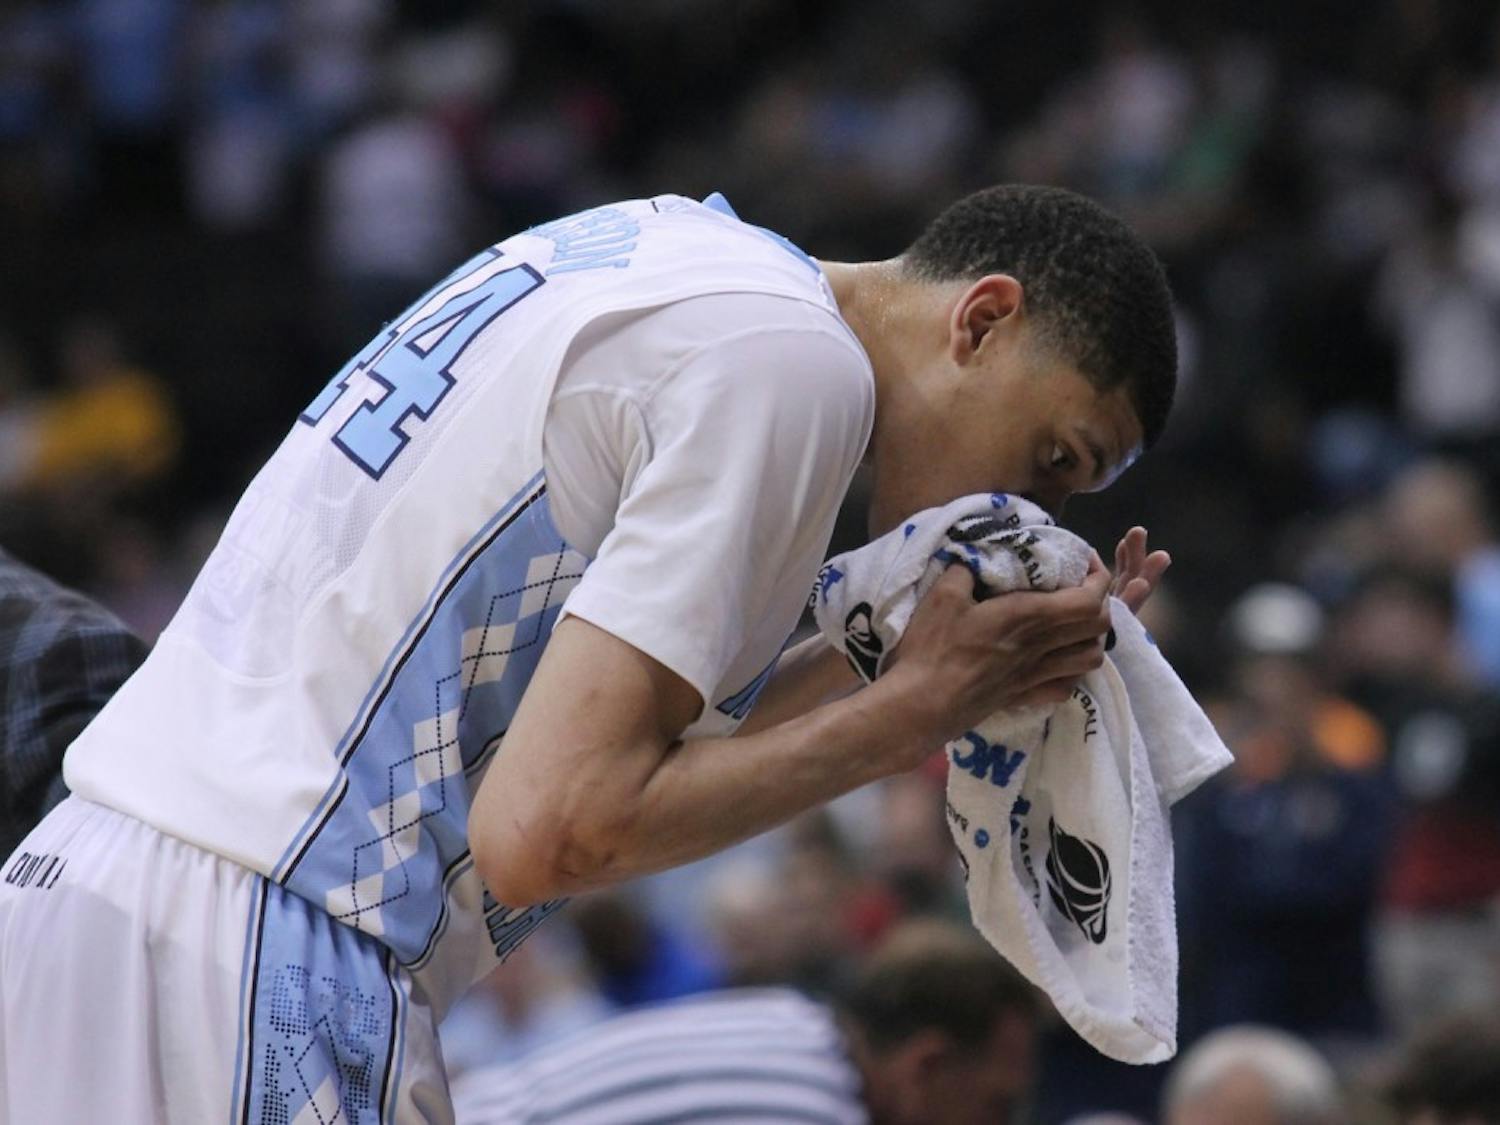 UNC freshman Justin Jackson (44) gets a bloody nose during Saturday's game.  The Tar Heels defeated the Arkansas Razorbacks, 87-78, on Saturday in Jacksonville, Fla.